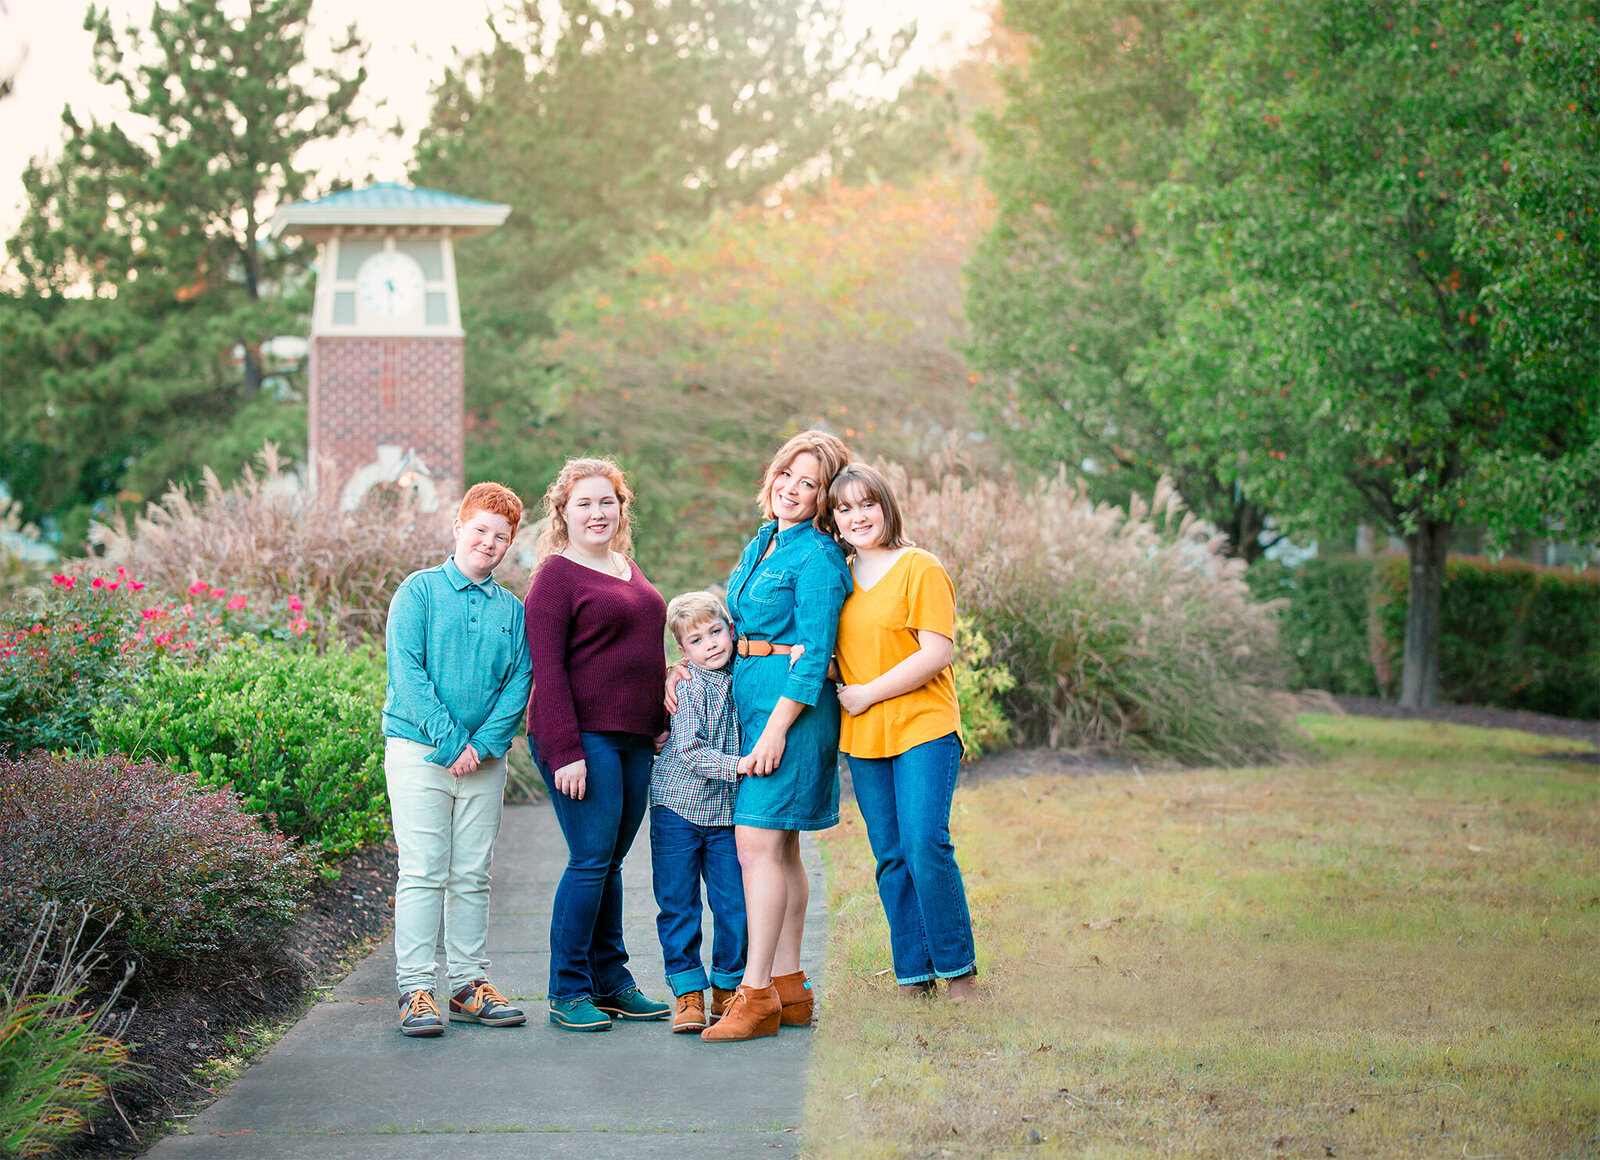 Family photographer Hampton Roads va captures outdoor spring family photos with parents and their children standing on the sidewalk in a garden with the sun beaming down above them